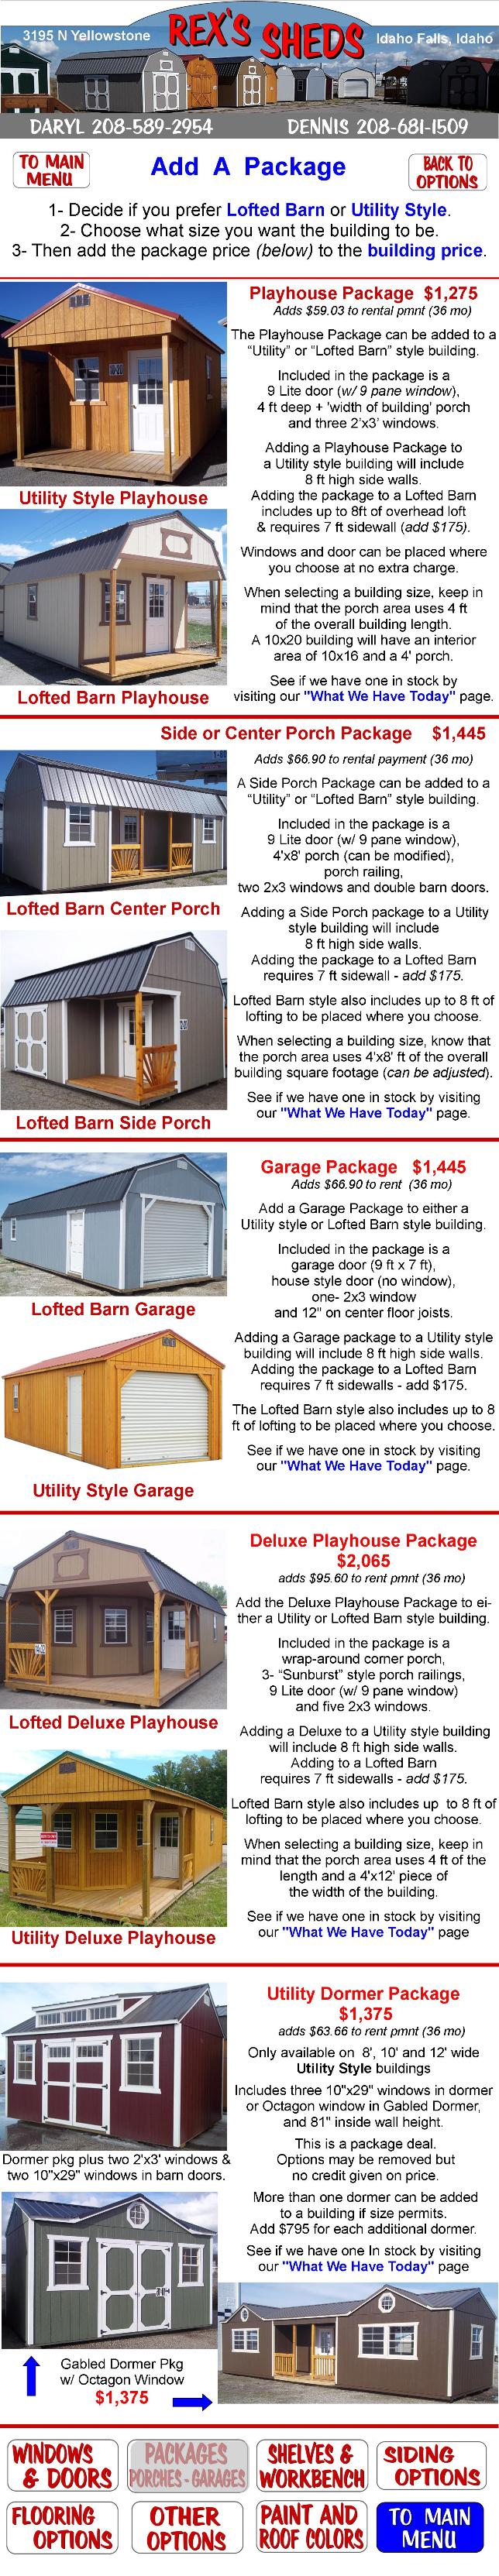 image_of_packages_to_add_to_sheds_including_porches_windows_garage_doors_and_dormers_with_prices_and_pics